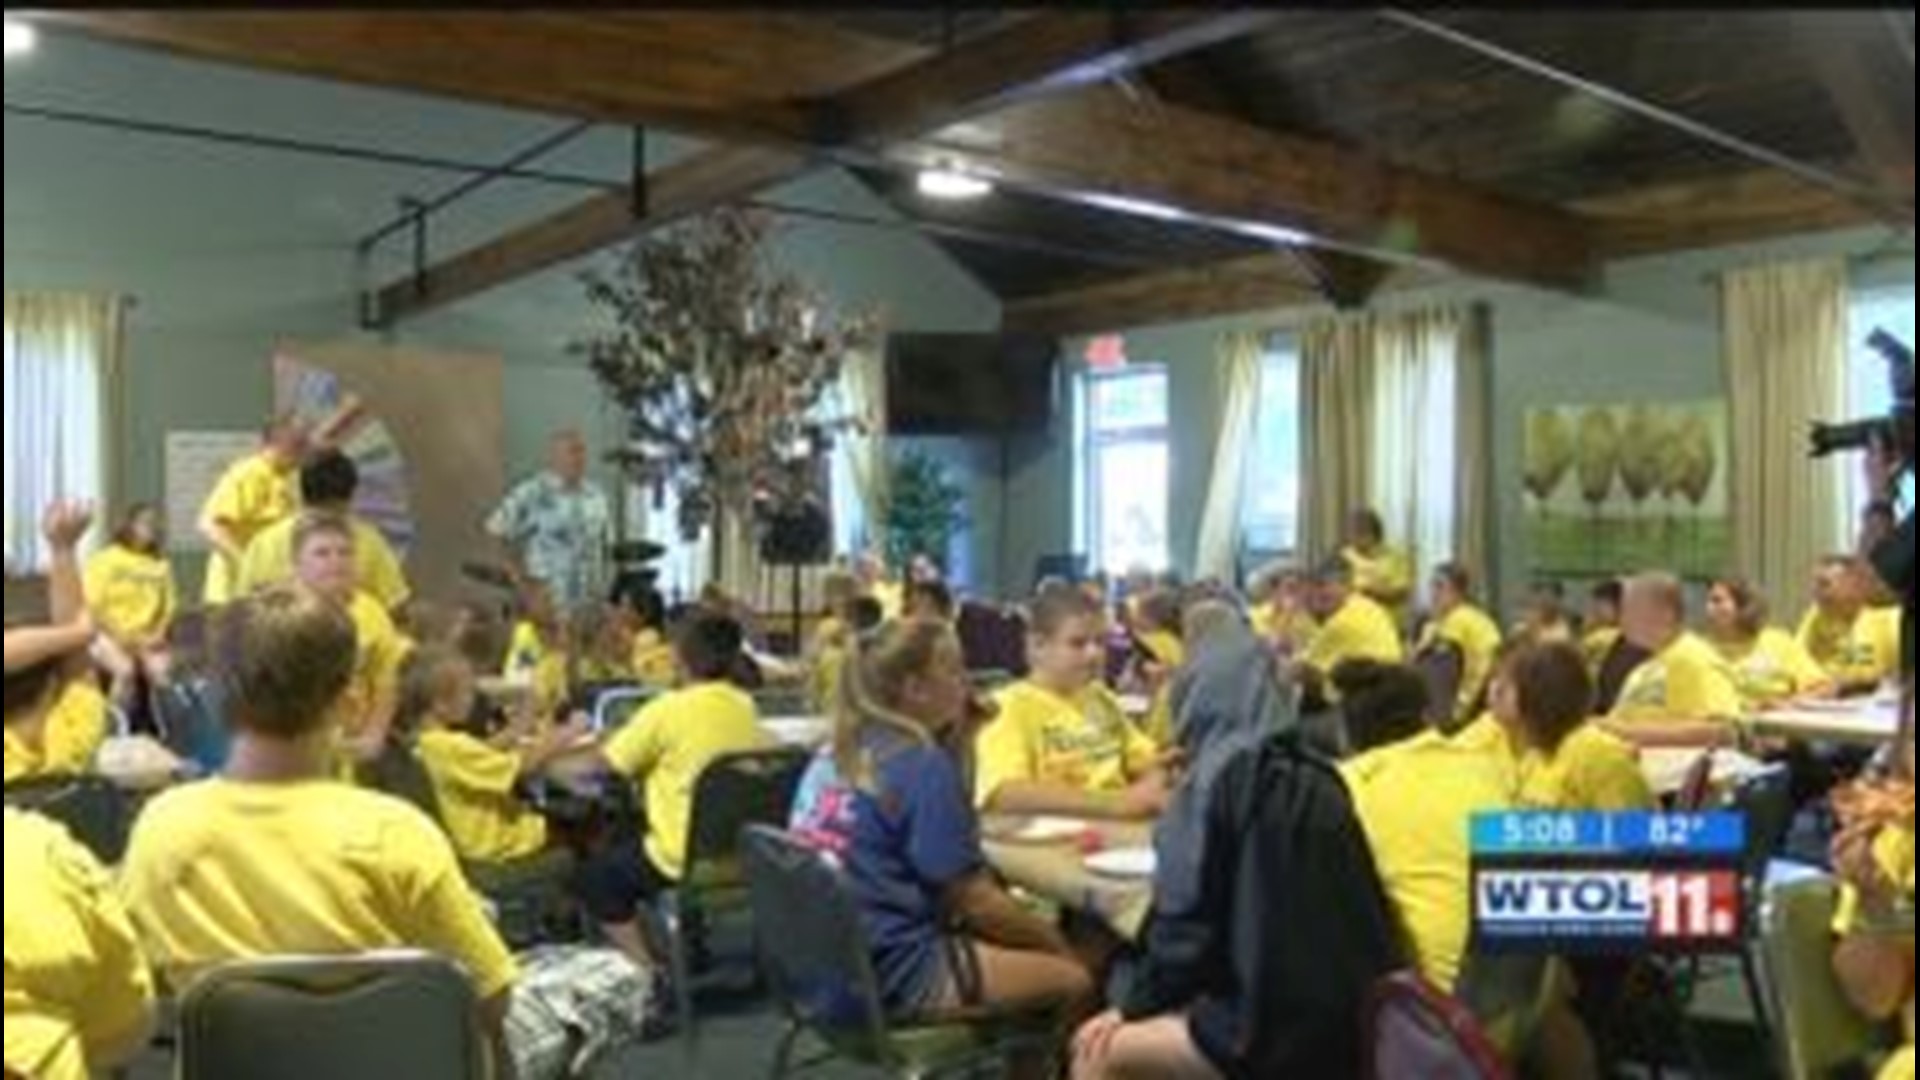 Camp Fearless helps kids experiencing a loss